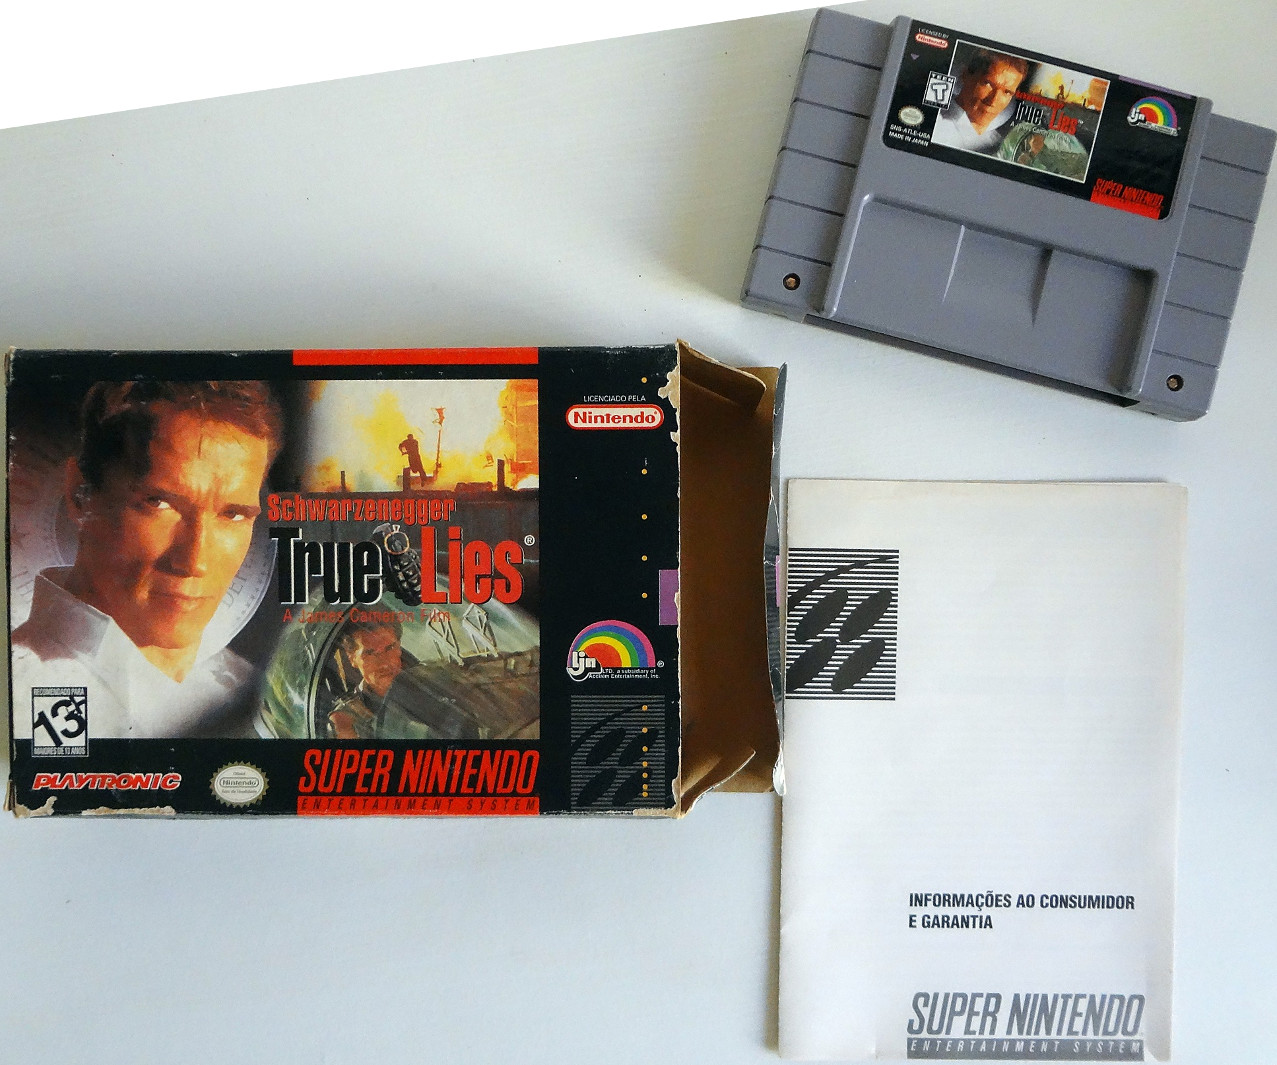 True Lies - Playtronic (CB - note the cart uses a standard US label)